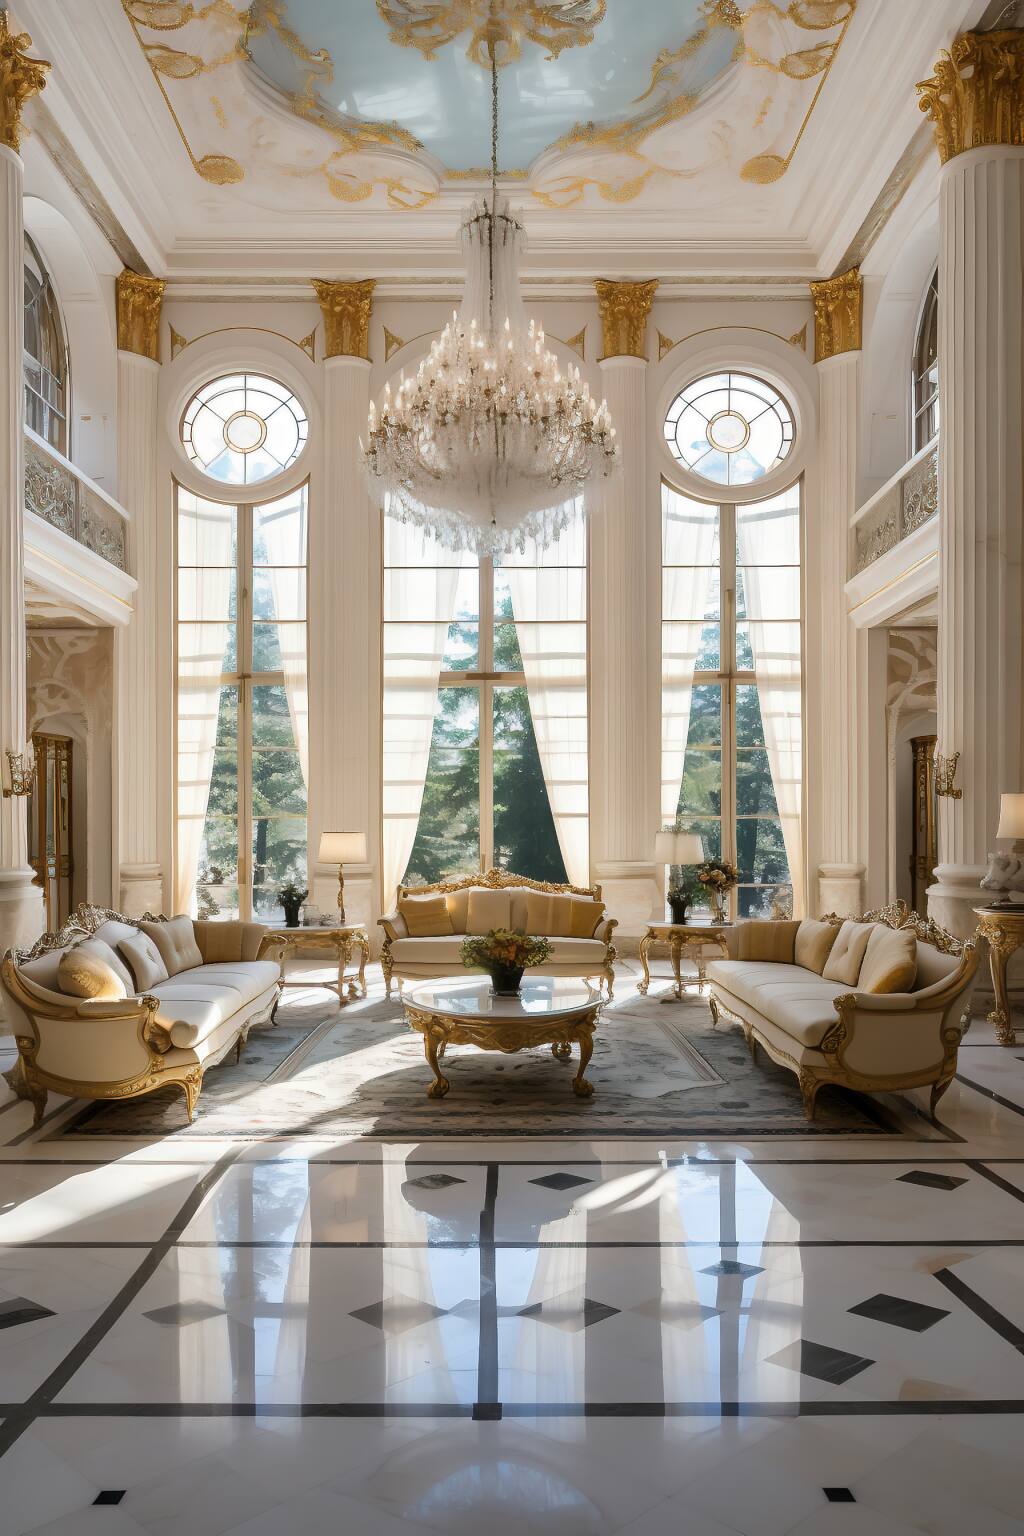 An Opulent Living Room With A Gold And Cream Color Scheme, Luxurious Furnishings, And Pristine Marble Flooring That Enhances The Room's Grandeur.